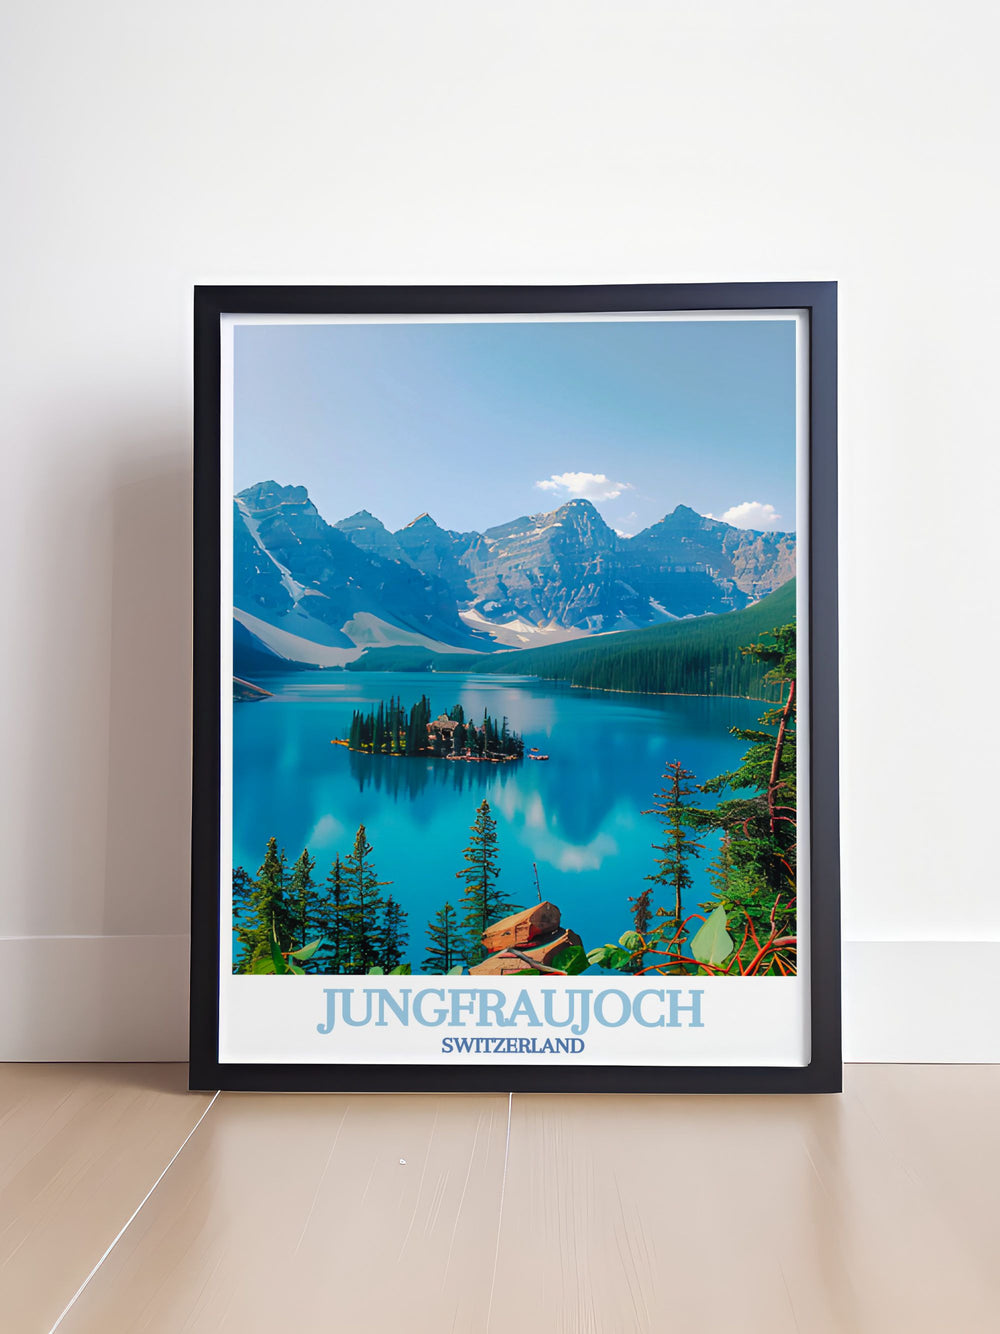 Captivating art print of Aletsch Glacier, featuring its impressive length and the serene alpine landscape, ideal for enhancing home decor.